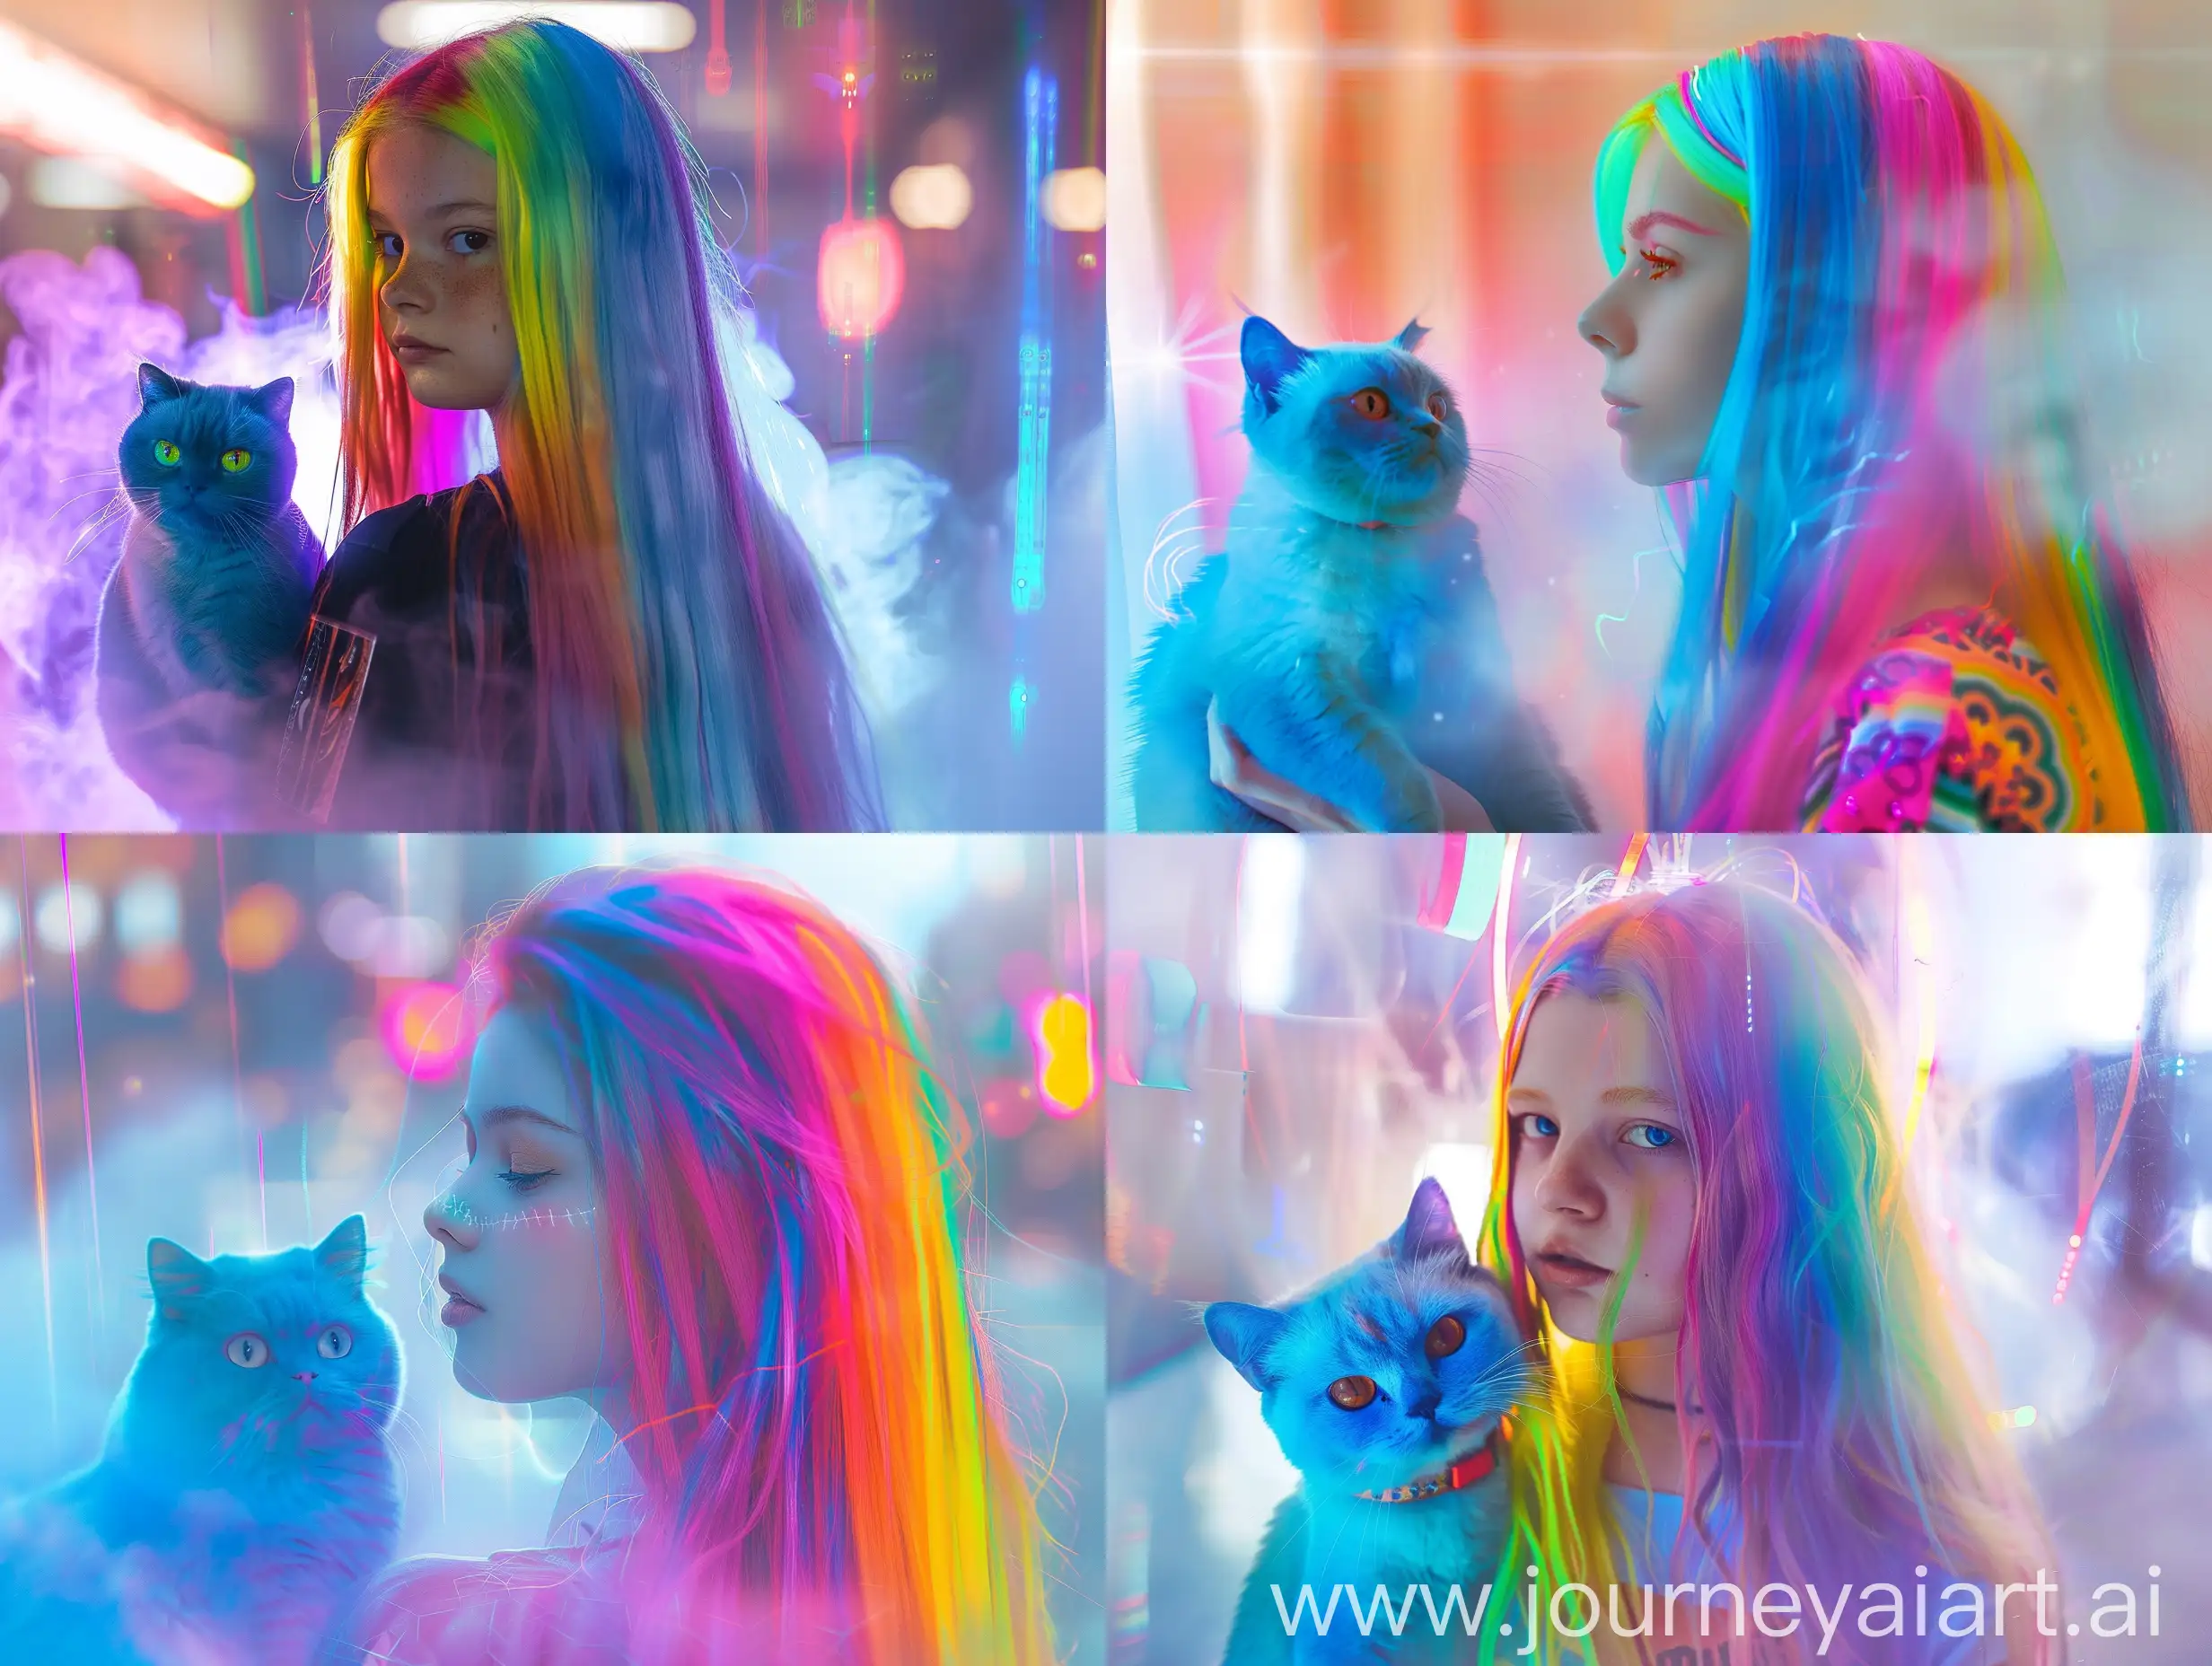 Cyberpunk-Girl-with-Rainbow-Hair-and-Blue-Cat-in-Laser-Haze